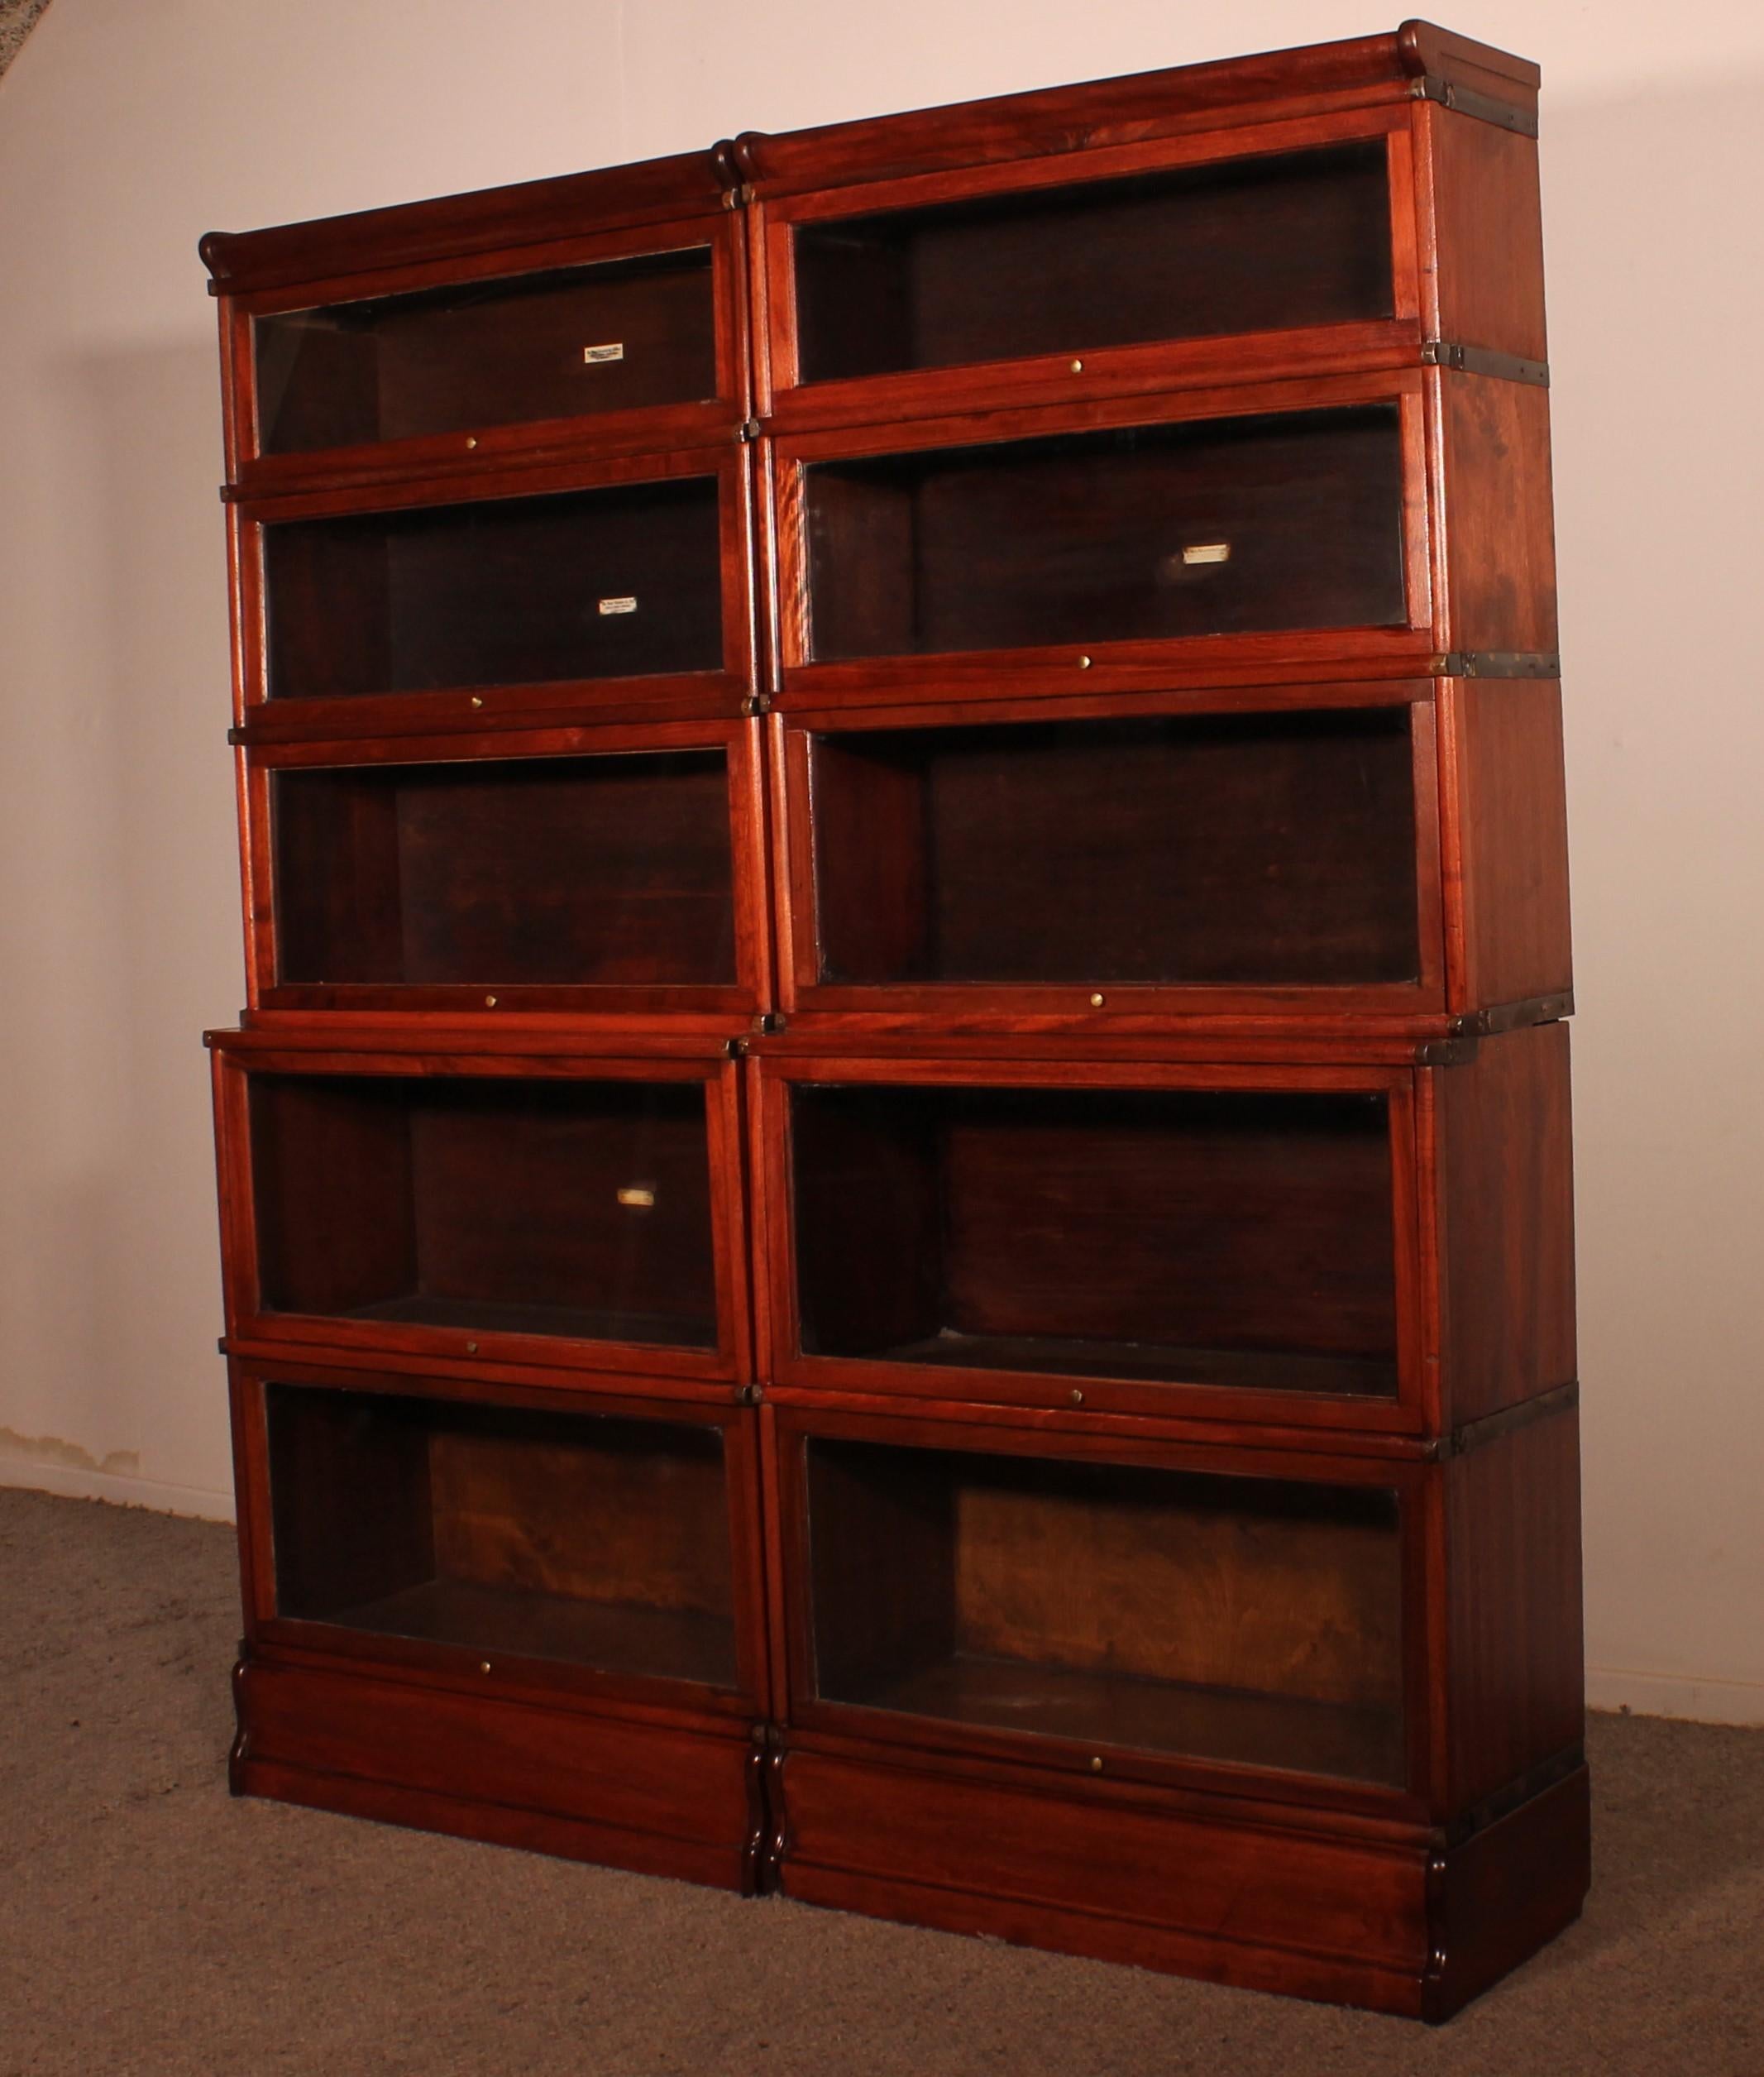 British Pair Of Globe Wernicke Bookcases In Mahogany-19th Century For Sale